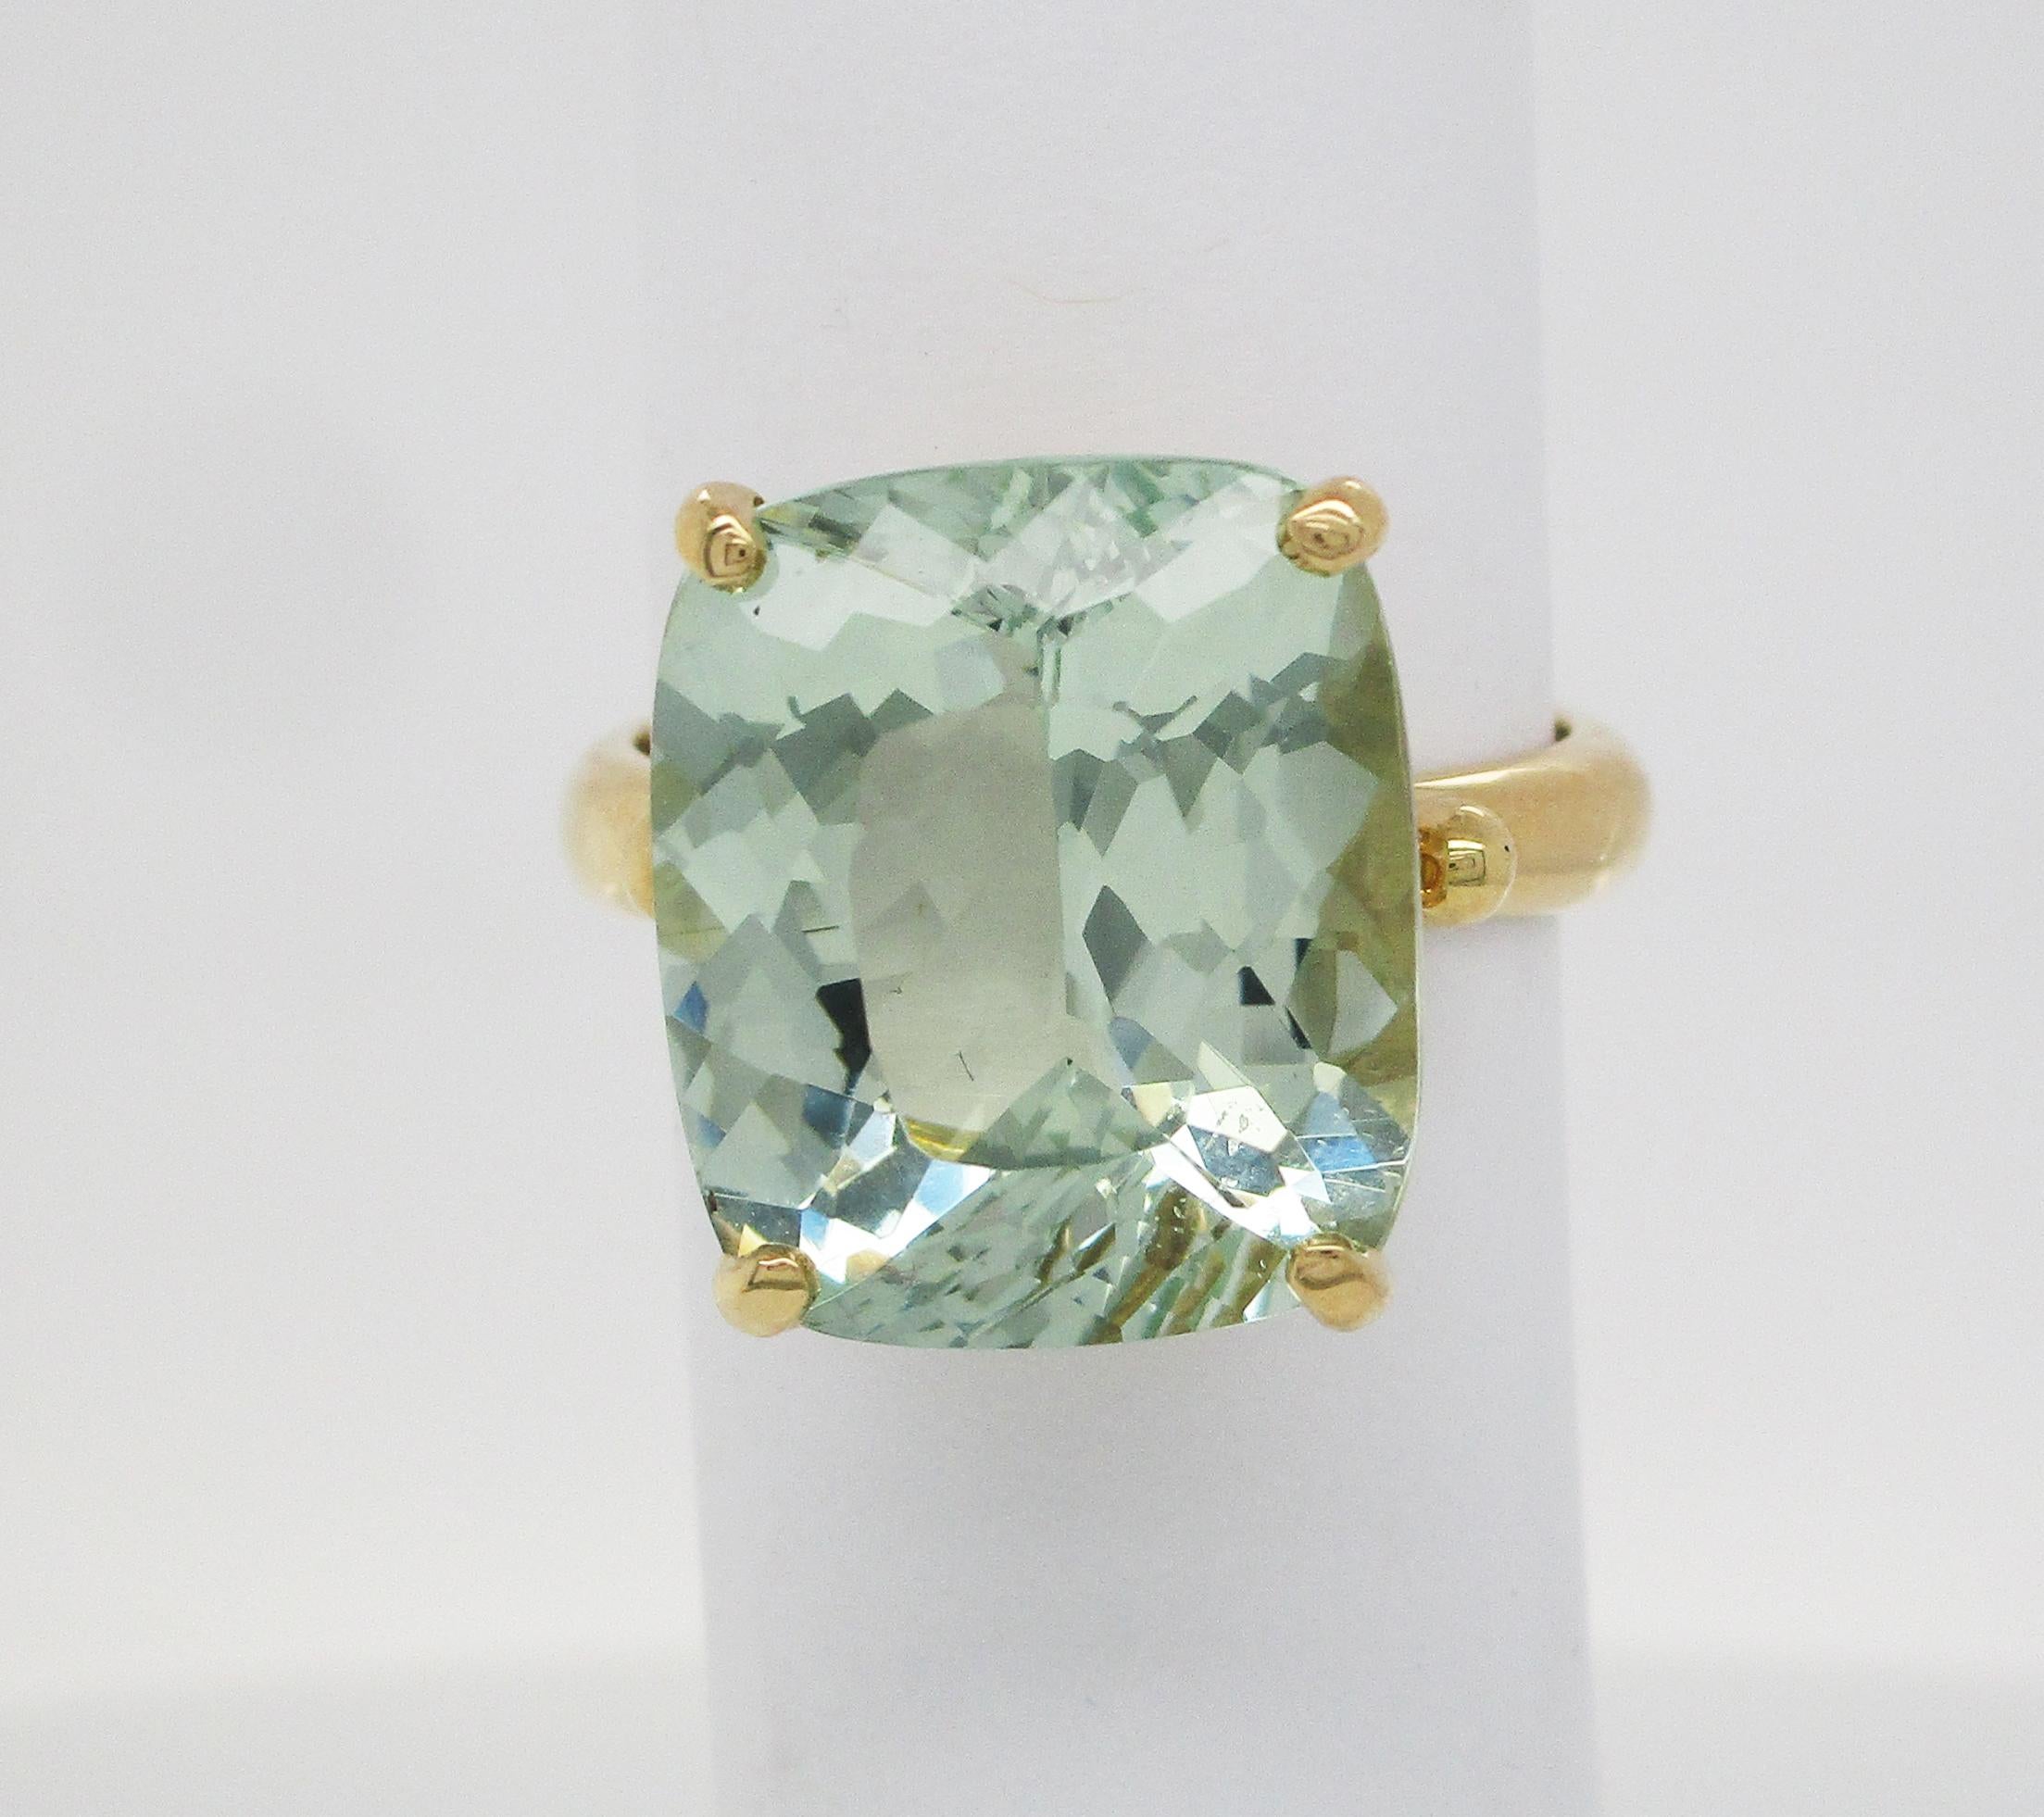 This is a beautiful ring in 18k yellow gold with a delightful mint green beryl center stone! The ring itself is an elegant design with under gallery details featuring overlapping curves and negative space. The rich yellow gold is the perfect frame